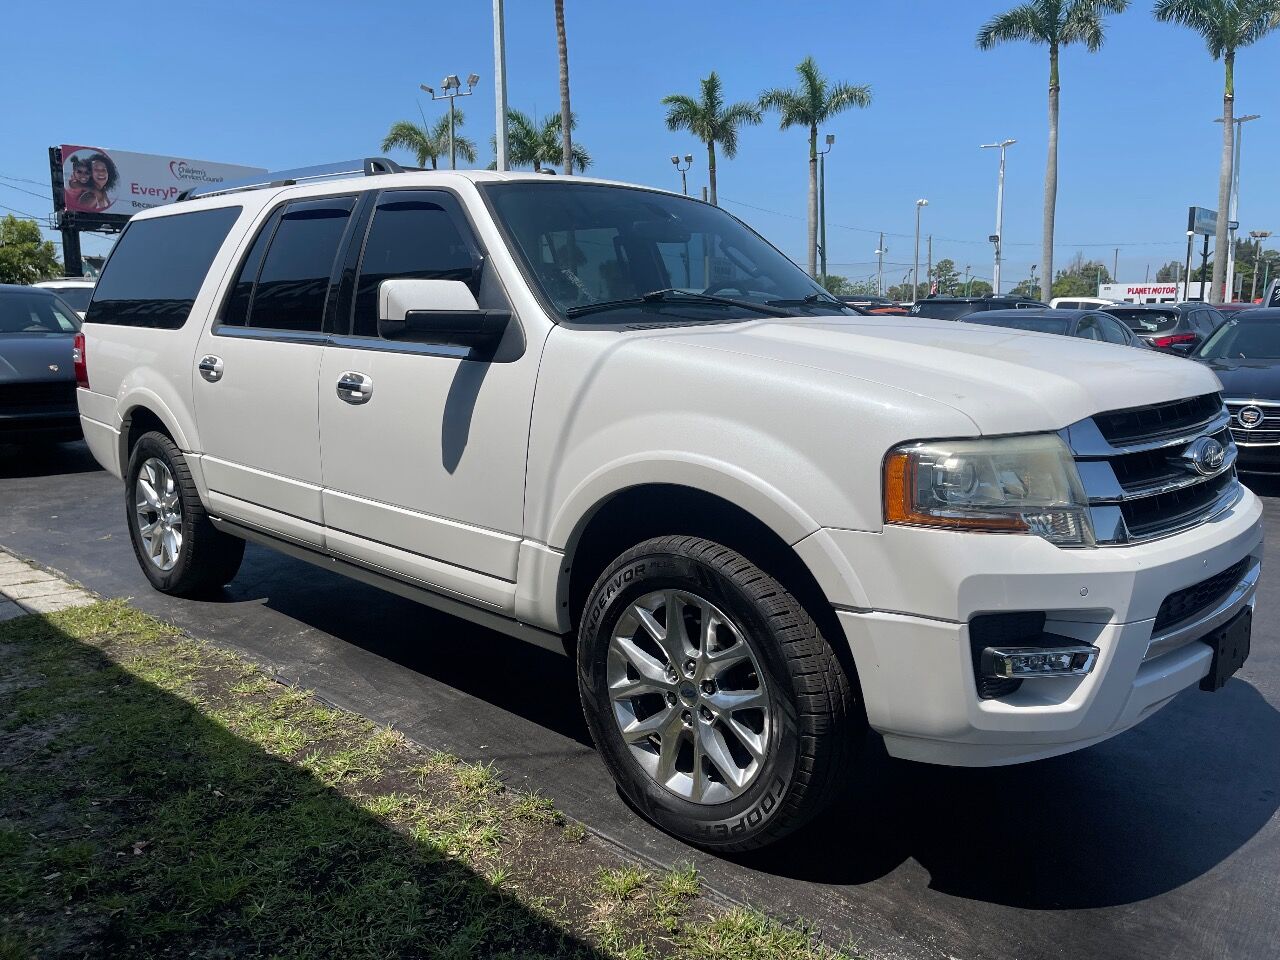 2015 Ford Expedition SUV - $18,900